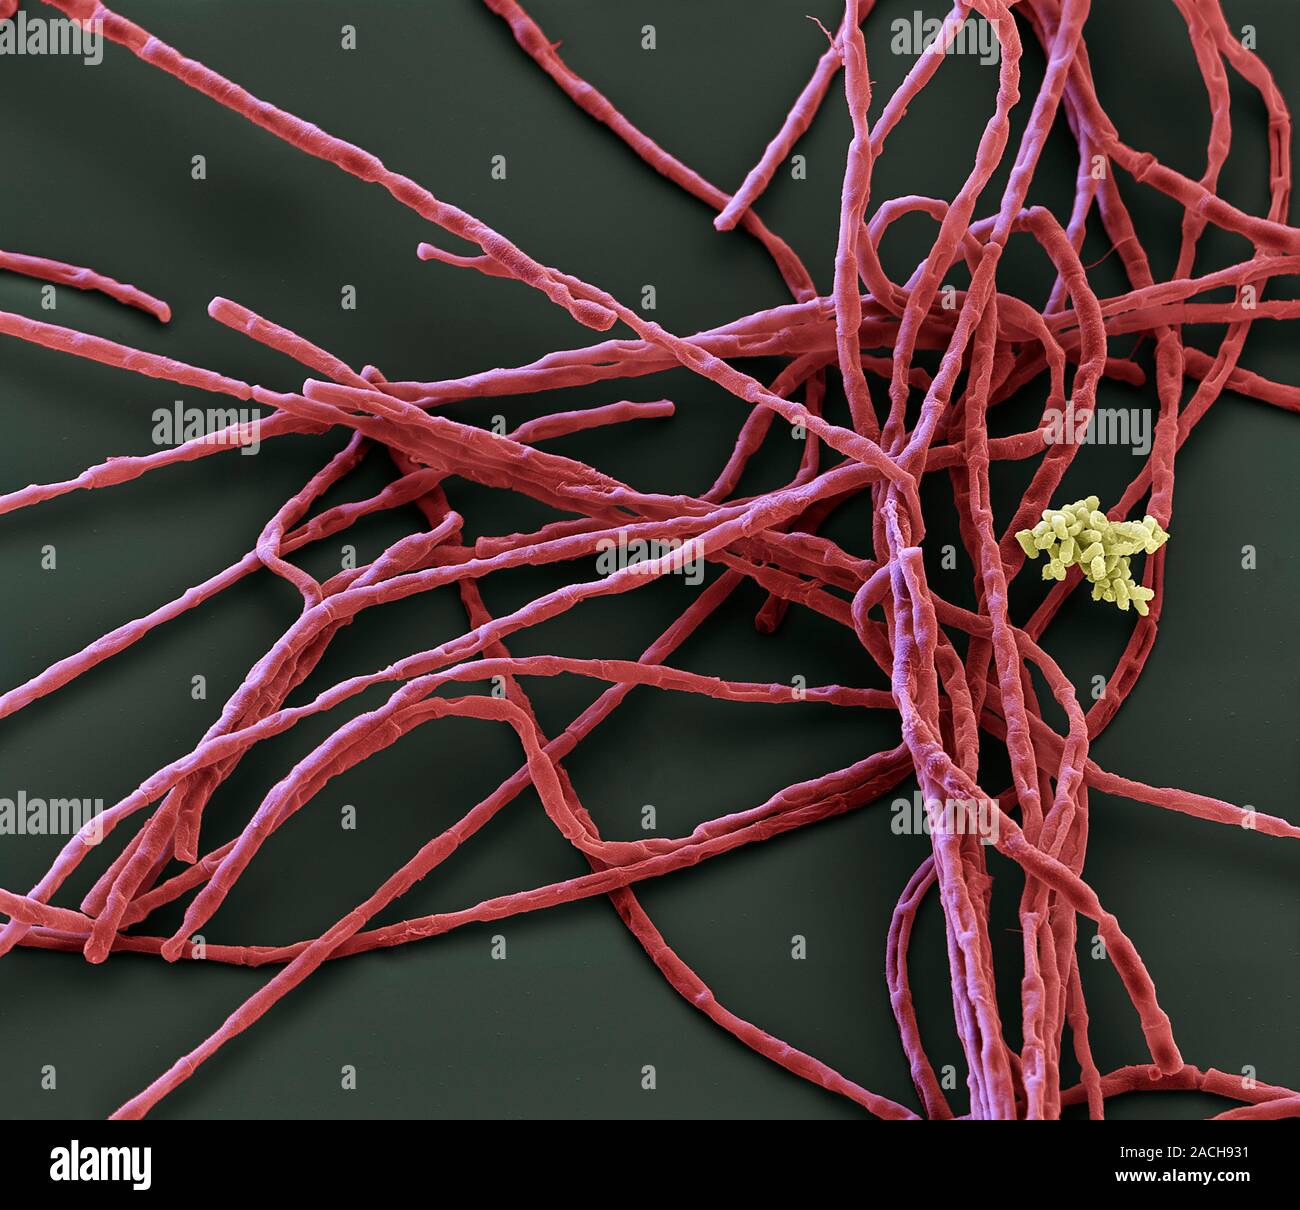 Anthrax Bacteria Coloured Scanning Electron Micrograph Sem Of Bacillus Anthracis Bacteria 1641